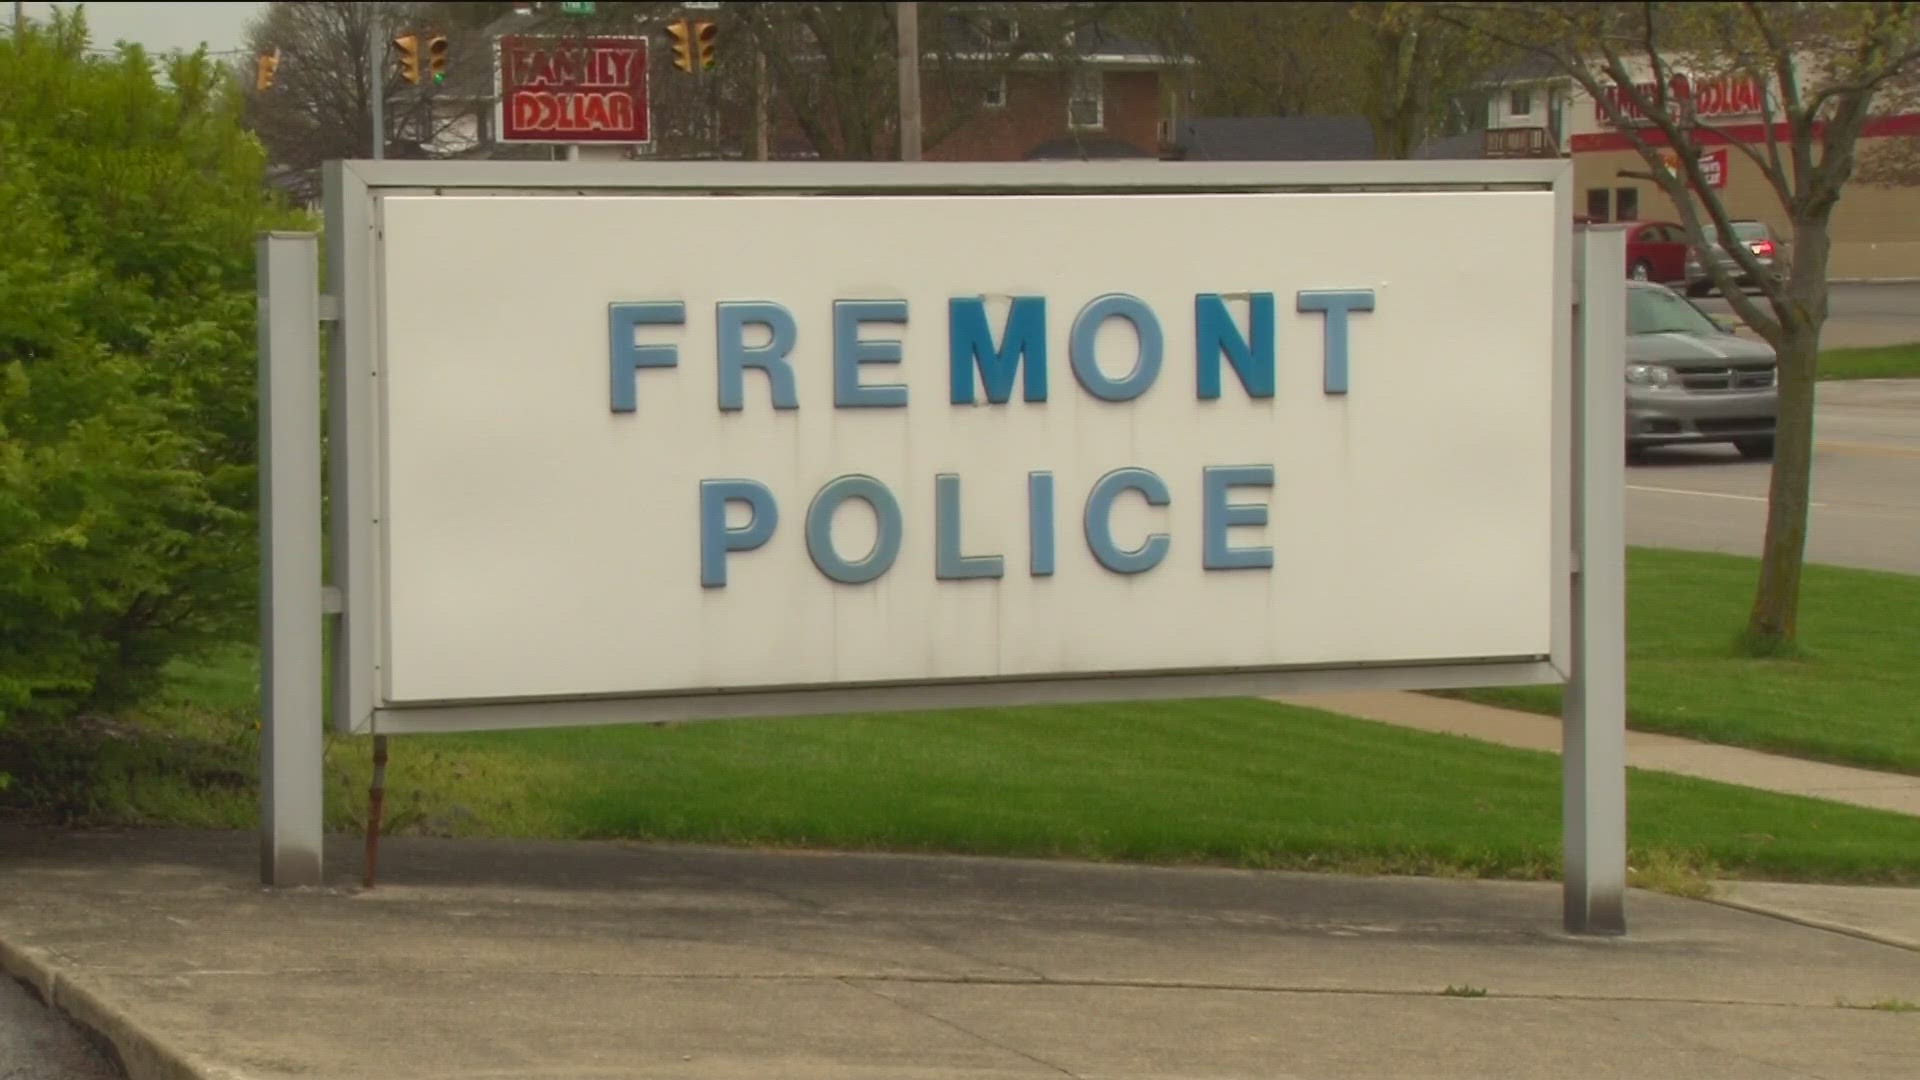 Fremont Police Officer Cage Roby resigned Feb. 24, after allegedly messaging a 17-year-old in a manner described by Chief Derek Wensinger as “criminal.”